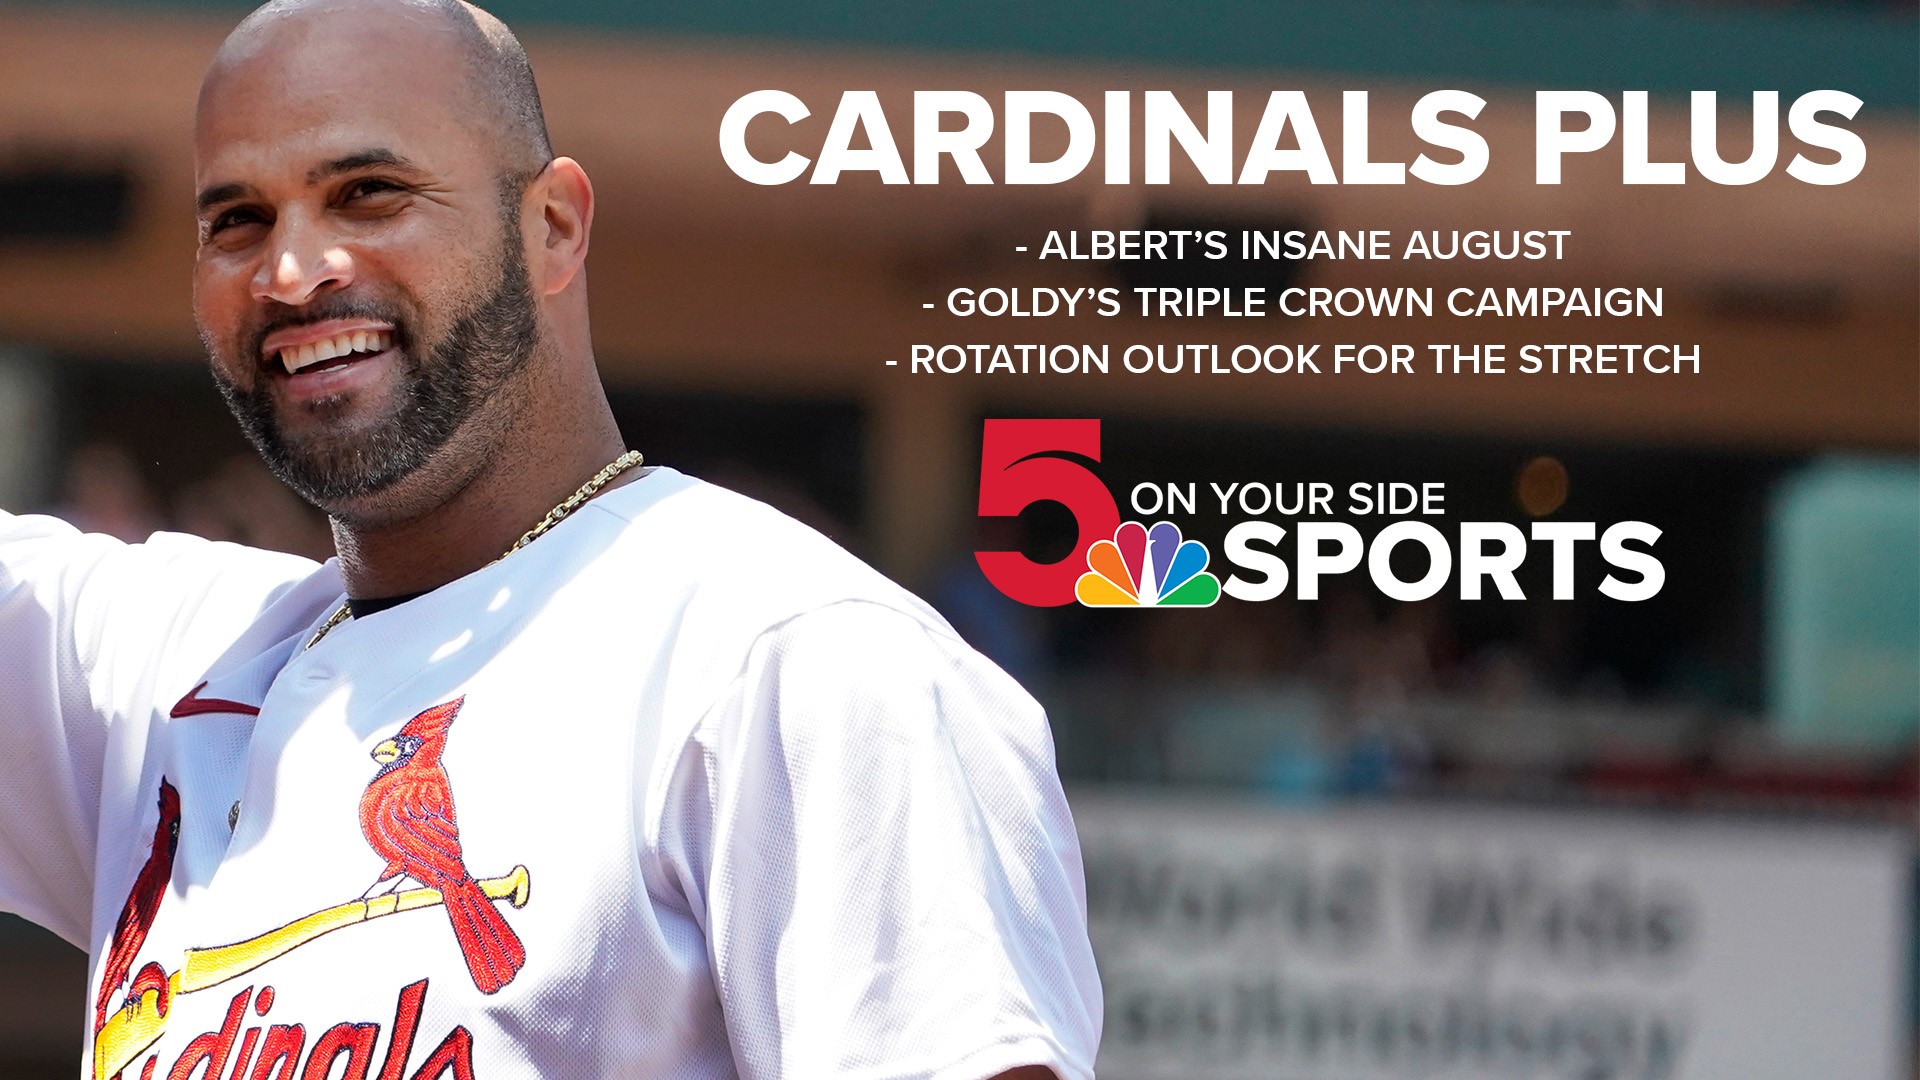 Pujols is closing in on the 700 home run club and Goldschmidt has a chance at the triple crown. We talk it over on this episode of Cardinals Plus.